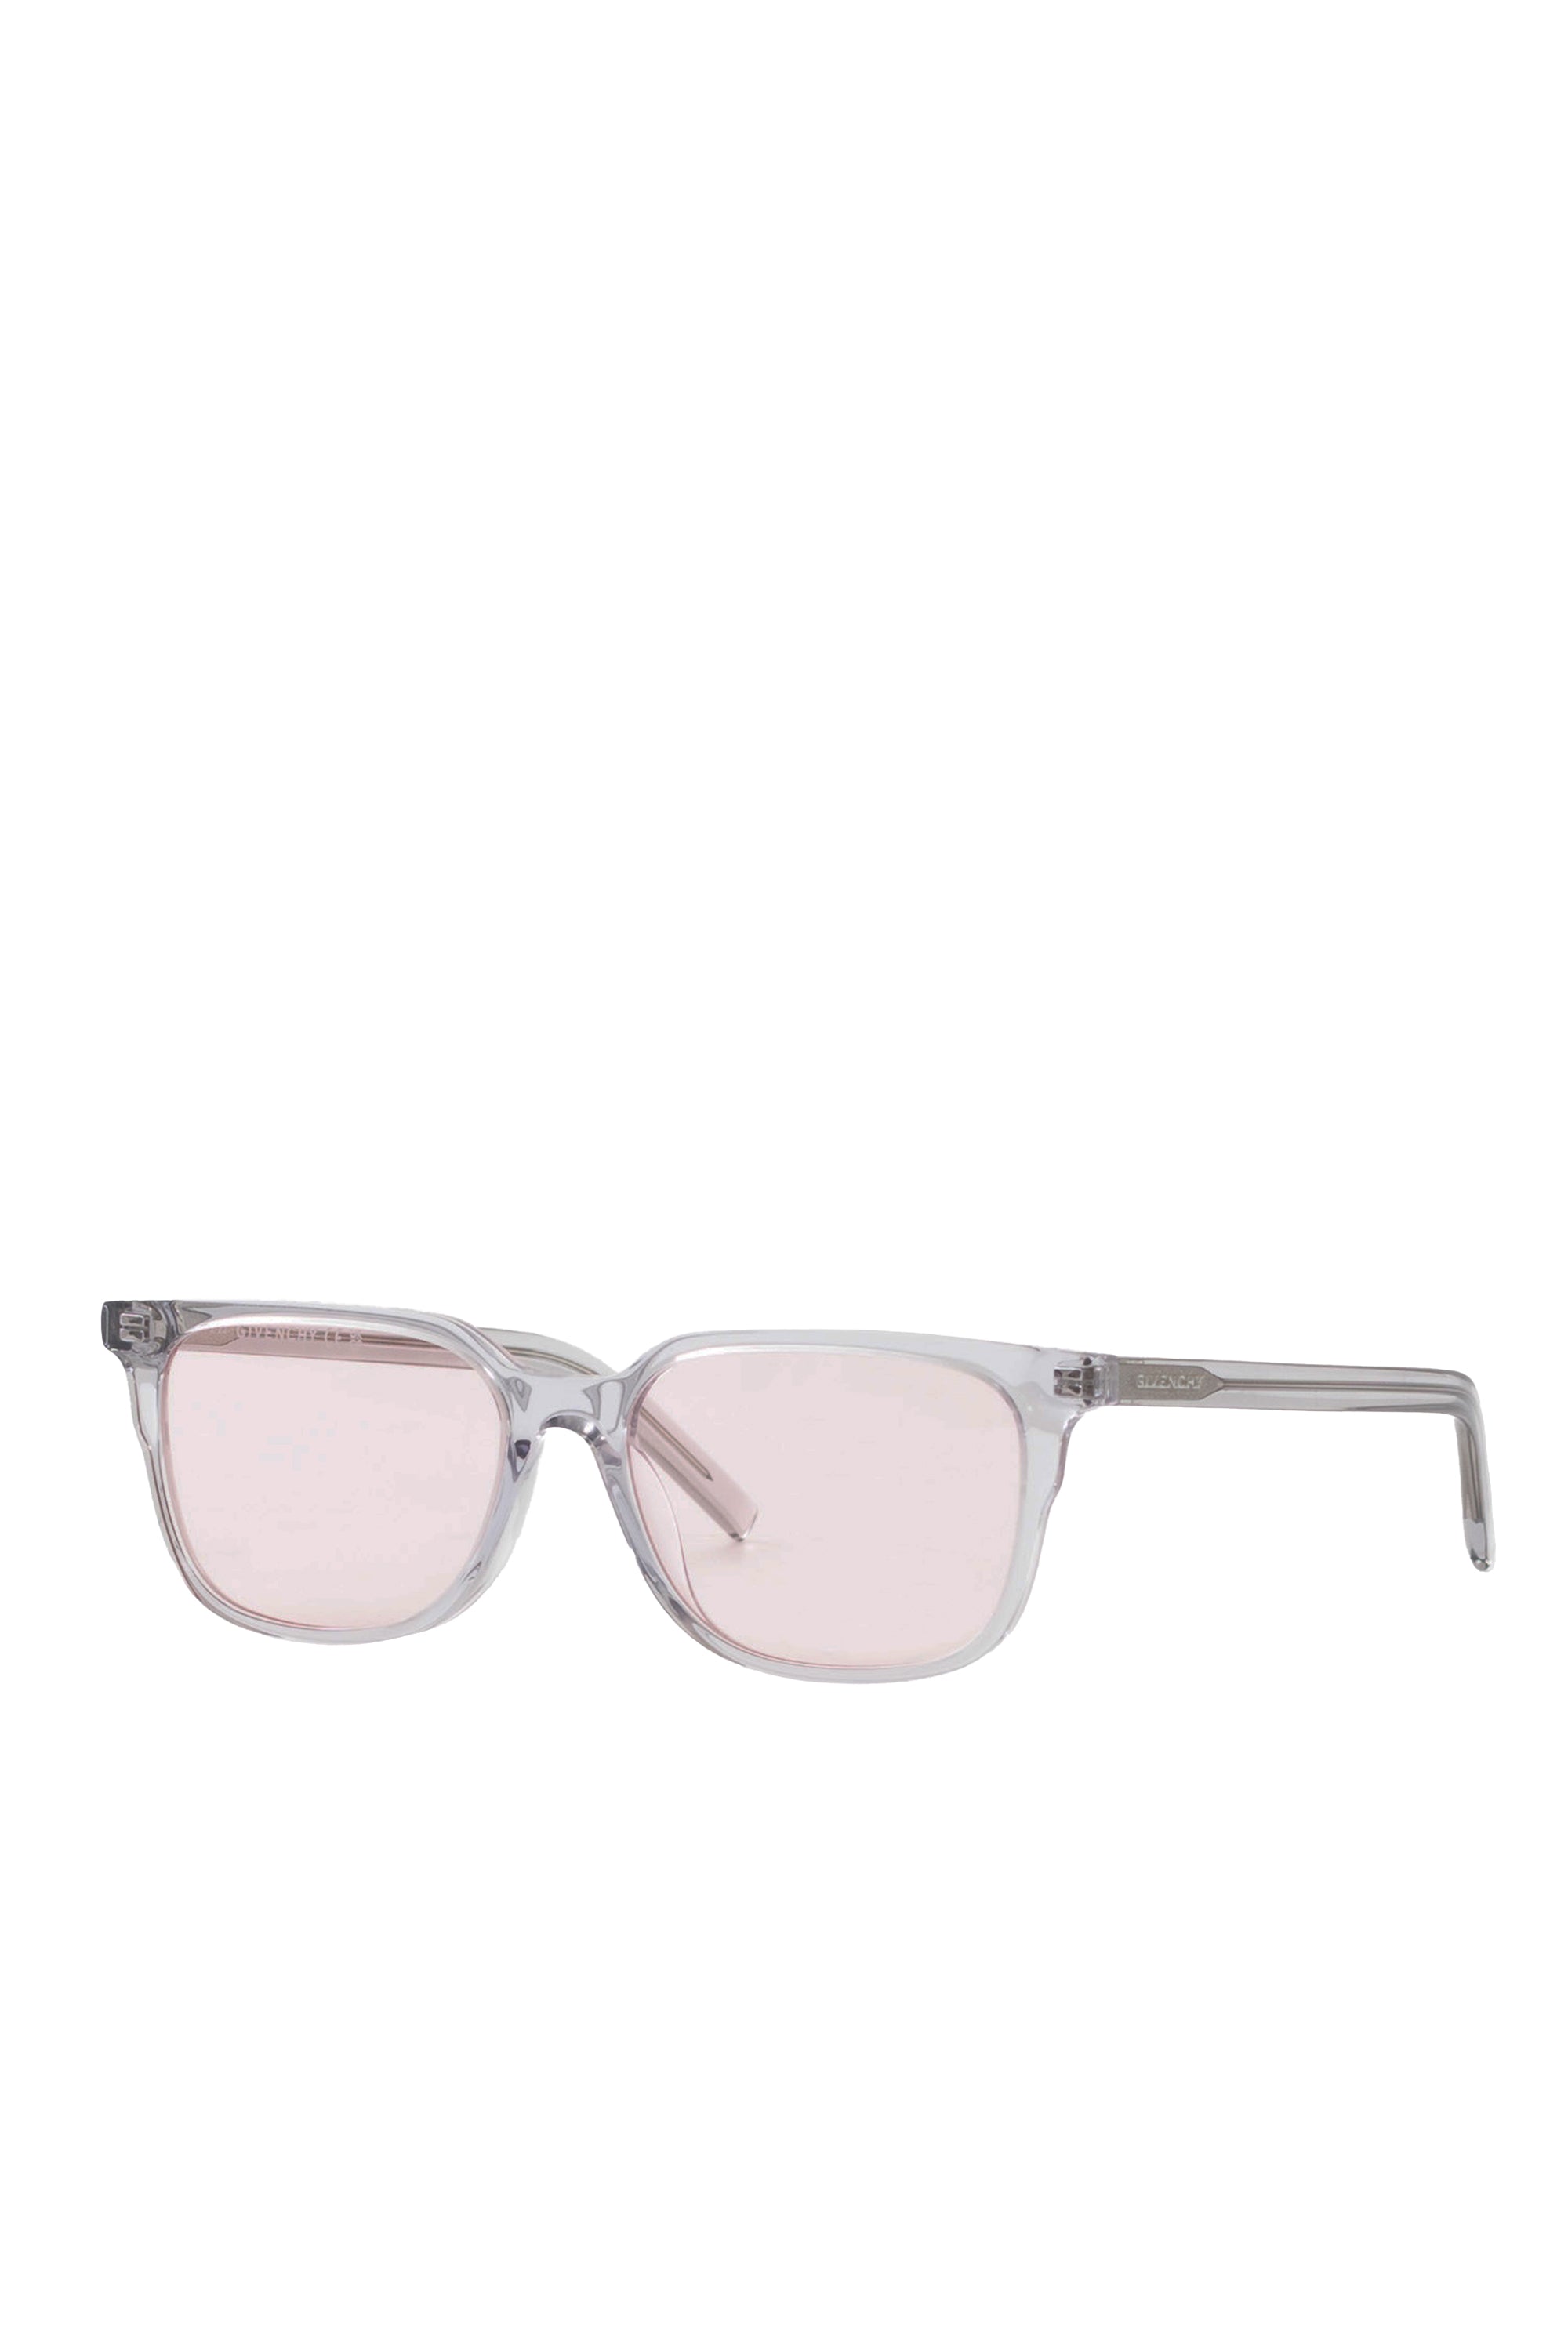 GIVENCHY FW23 FRAMES / BCLEAR RED LENS -NUBIAN